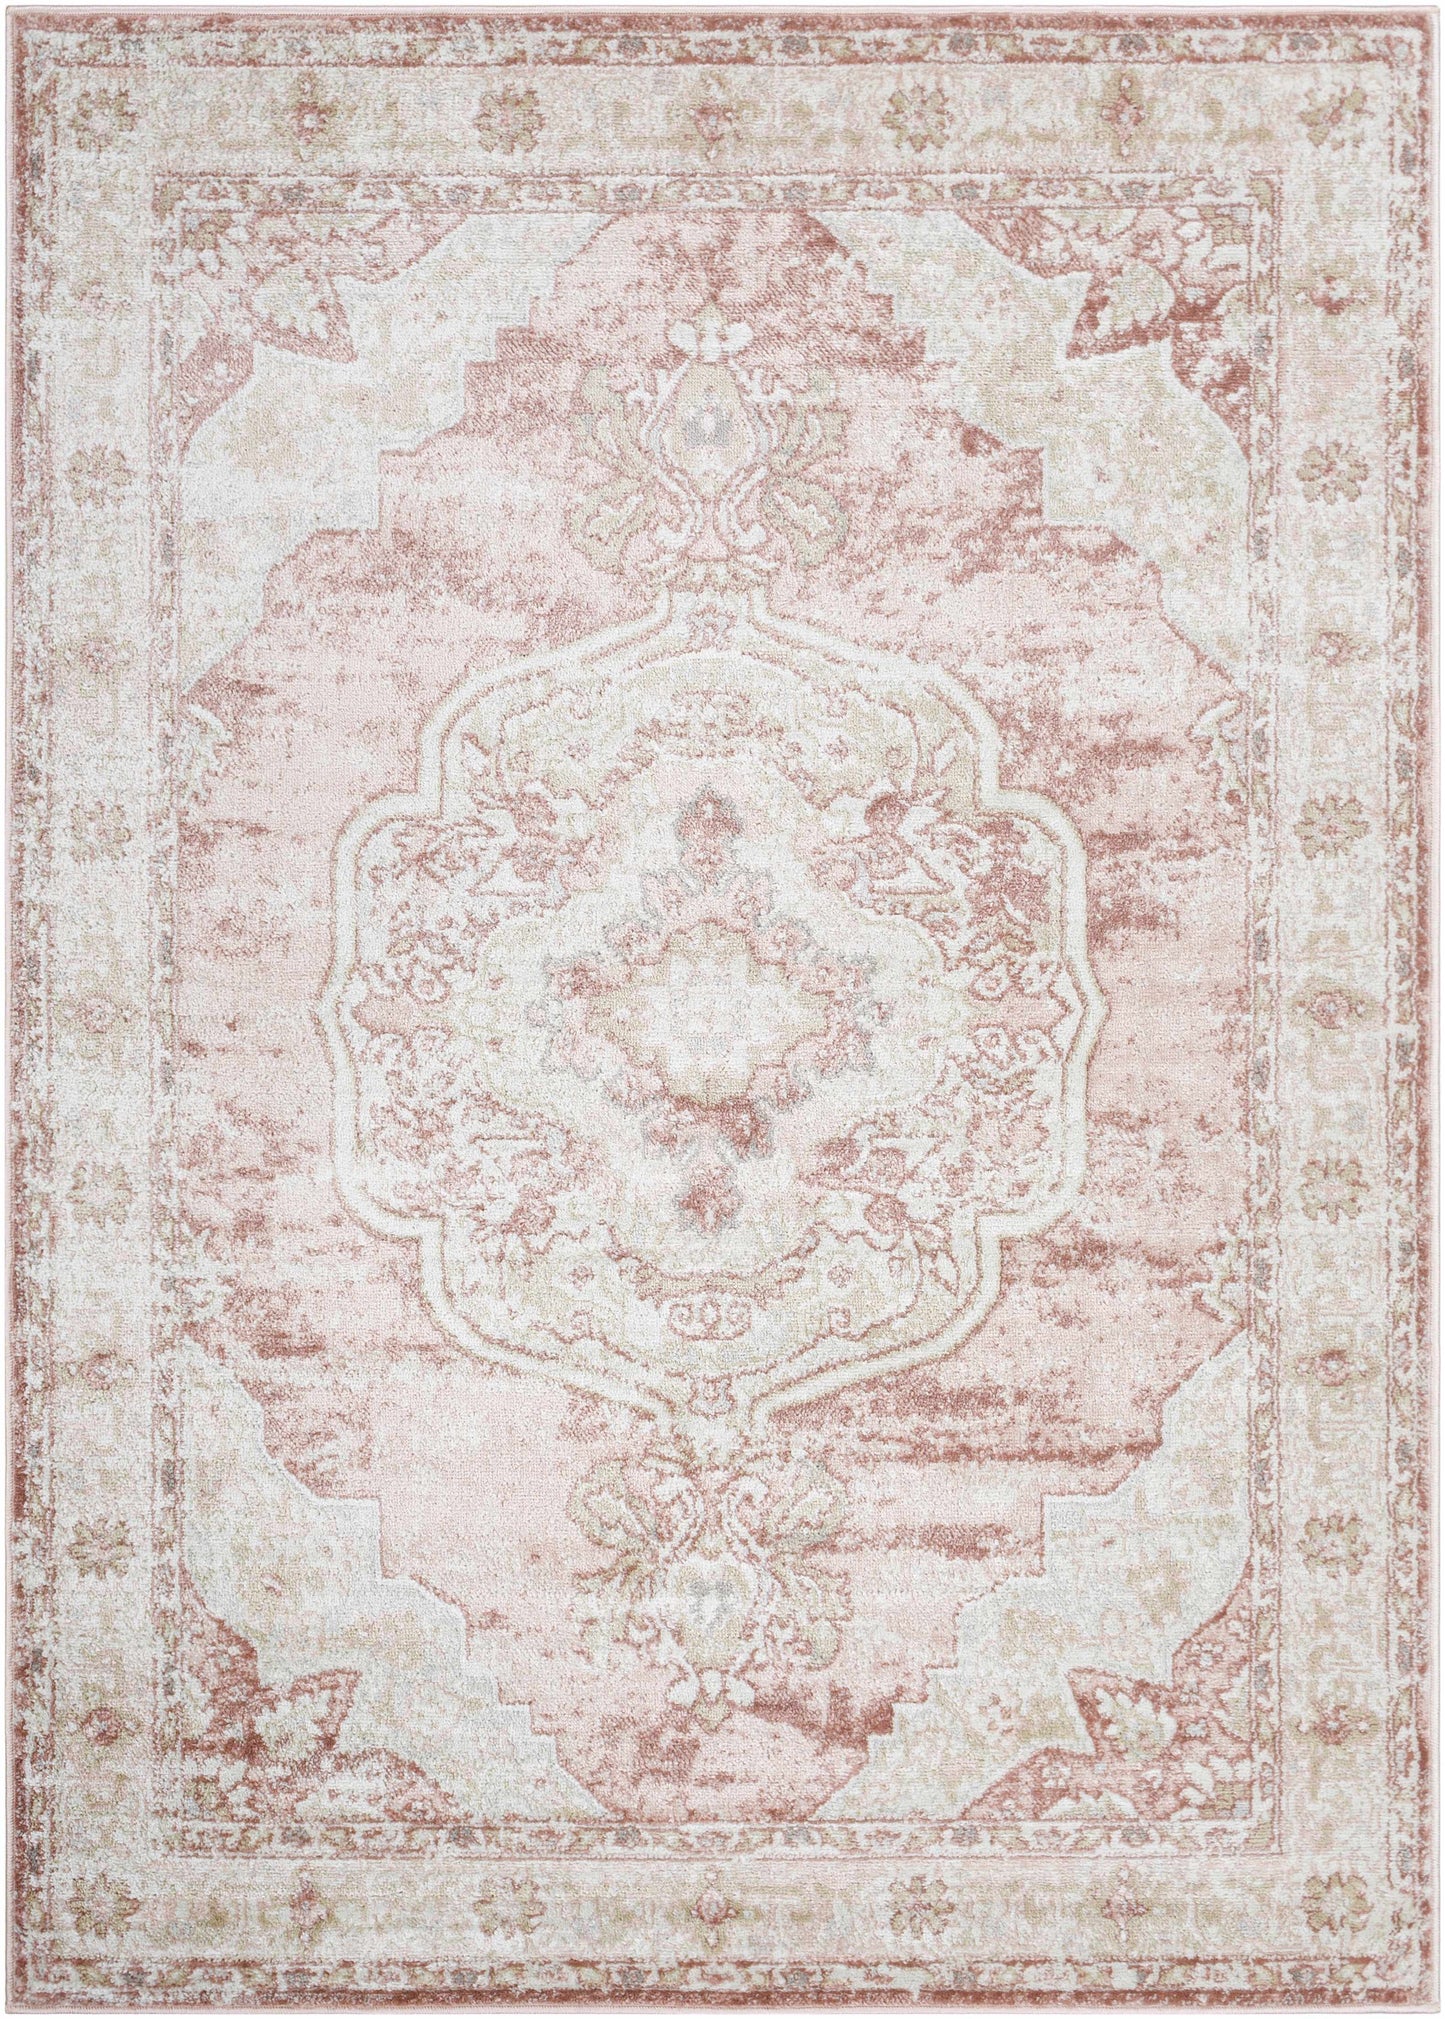 Boutique Rugs Rugs 5'2" x 7' Rectangle Kandos Area Rug